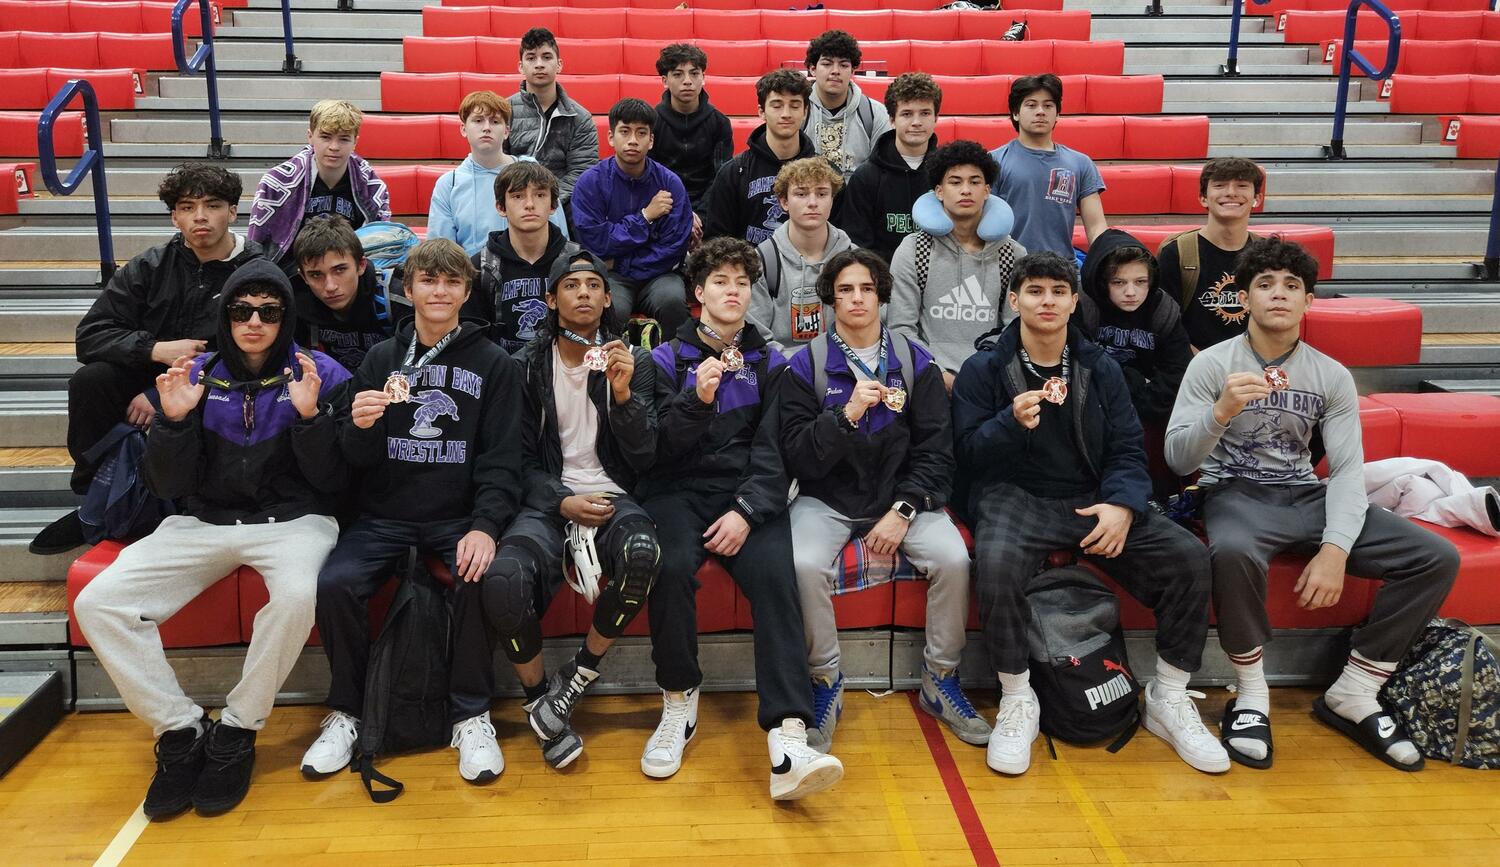 The Hampton Bays wrestling team placed third at the St. John the Baptist Cougar Pride Invitational on Saturday finishing with eight placewinners led by Kevin Saa Pachecho who won the 124-pound weight class.